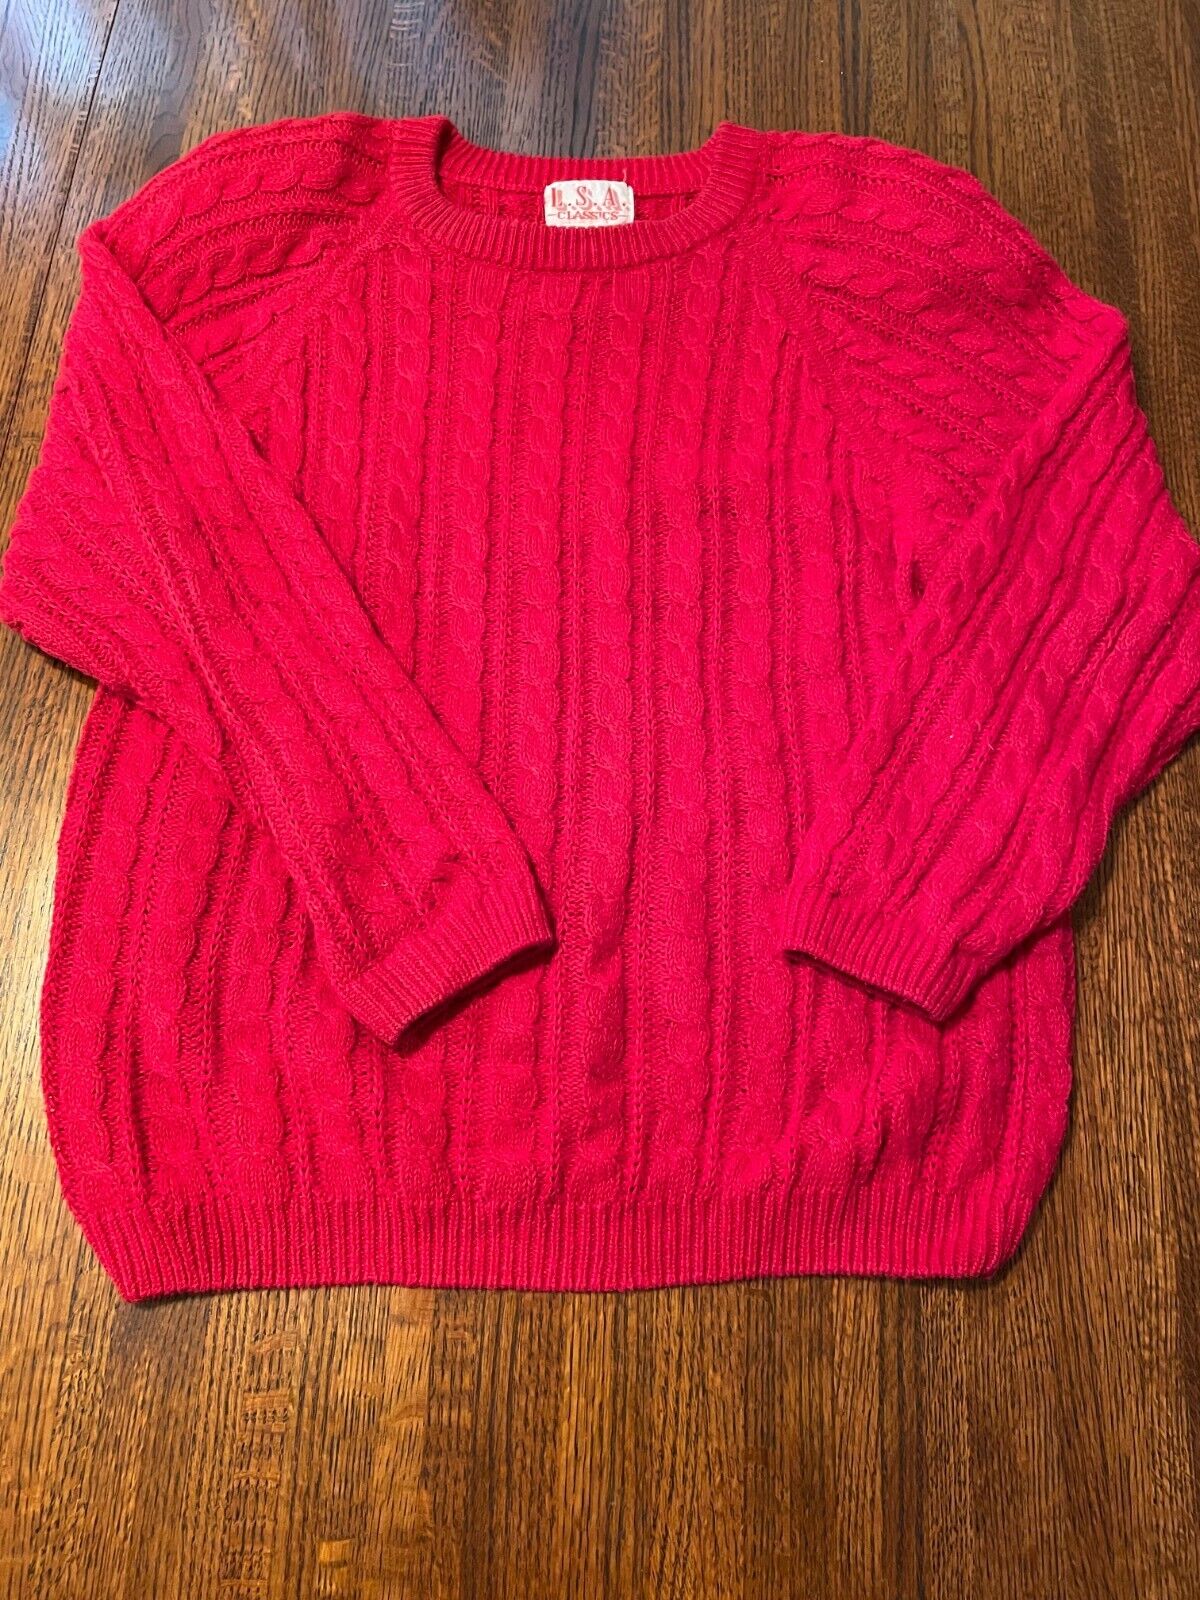 Vintage L. S. A. Classics Cable Knit Sweater Red Large